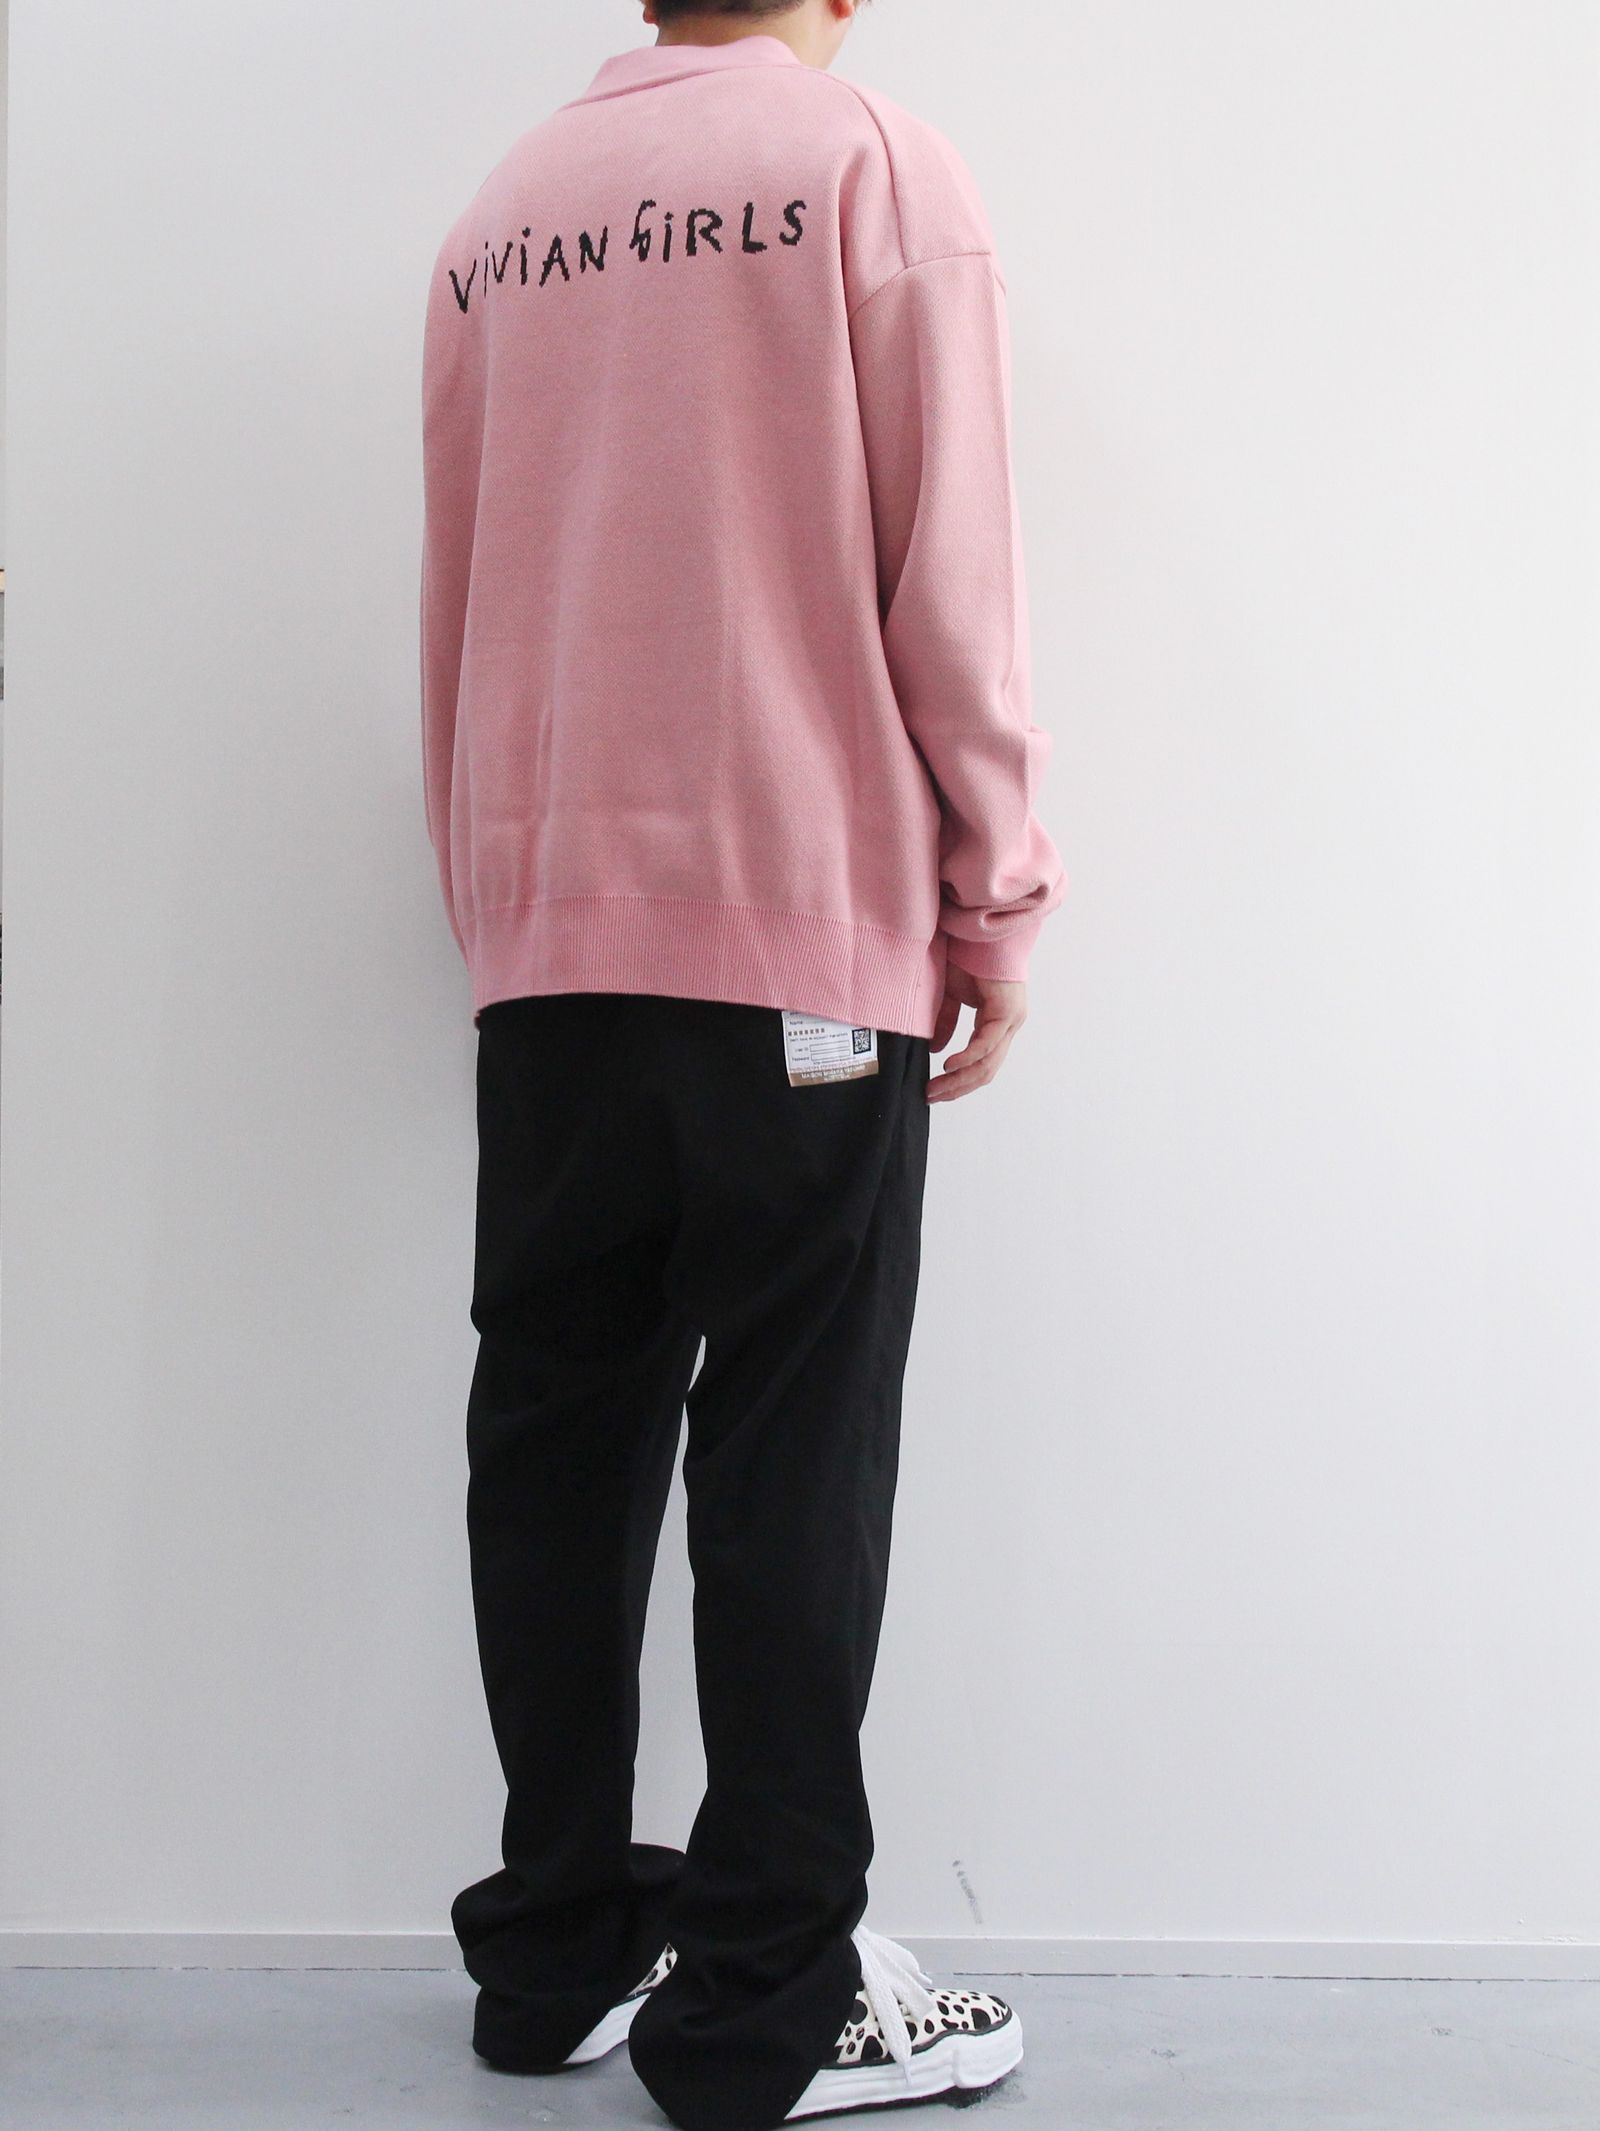 KIDILL - Knit Cardigan Angeline and Joyce KIDILL × Henry Darger  Collaboration PINK | ADDICT WEB SHOP